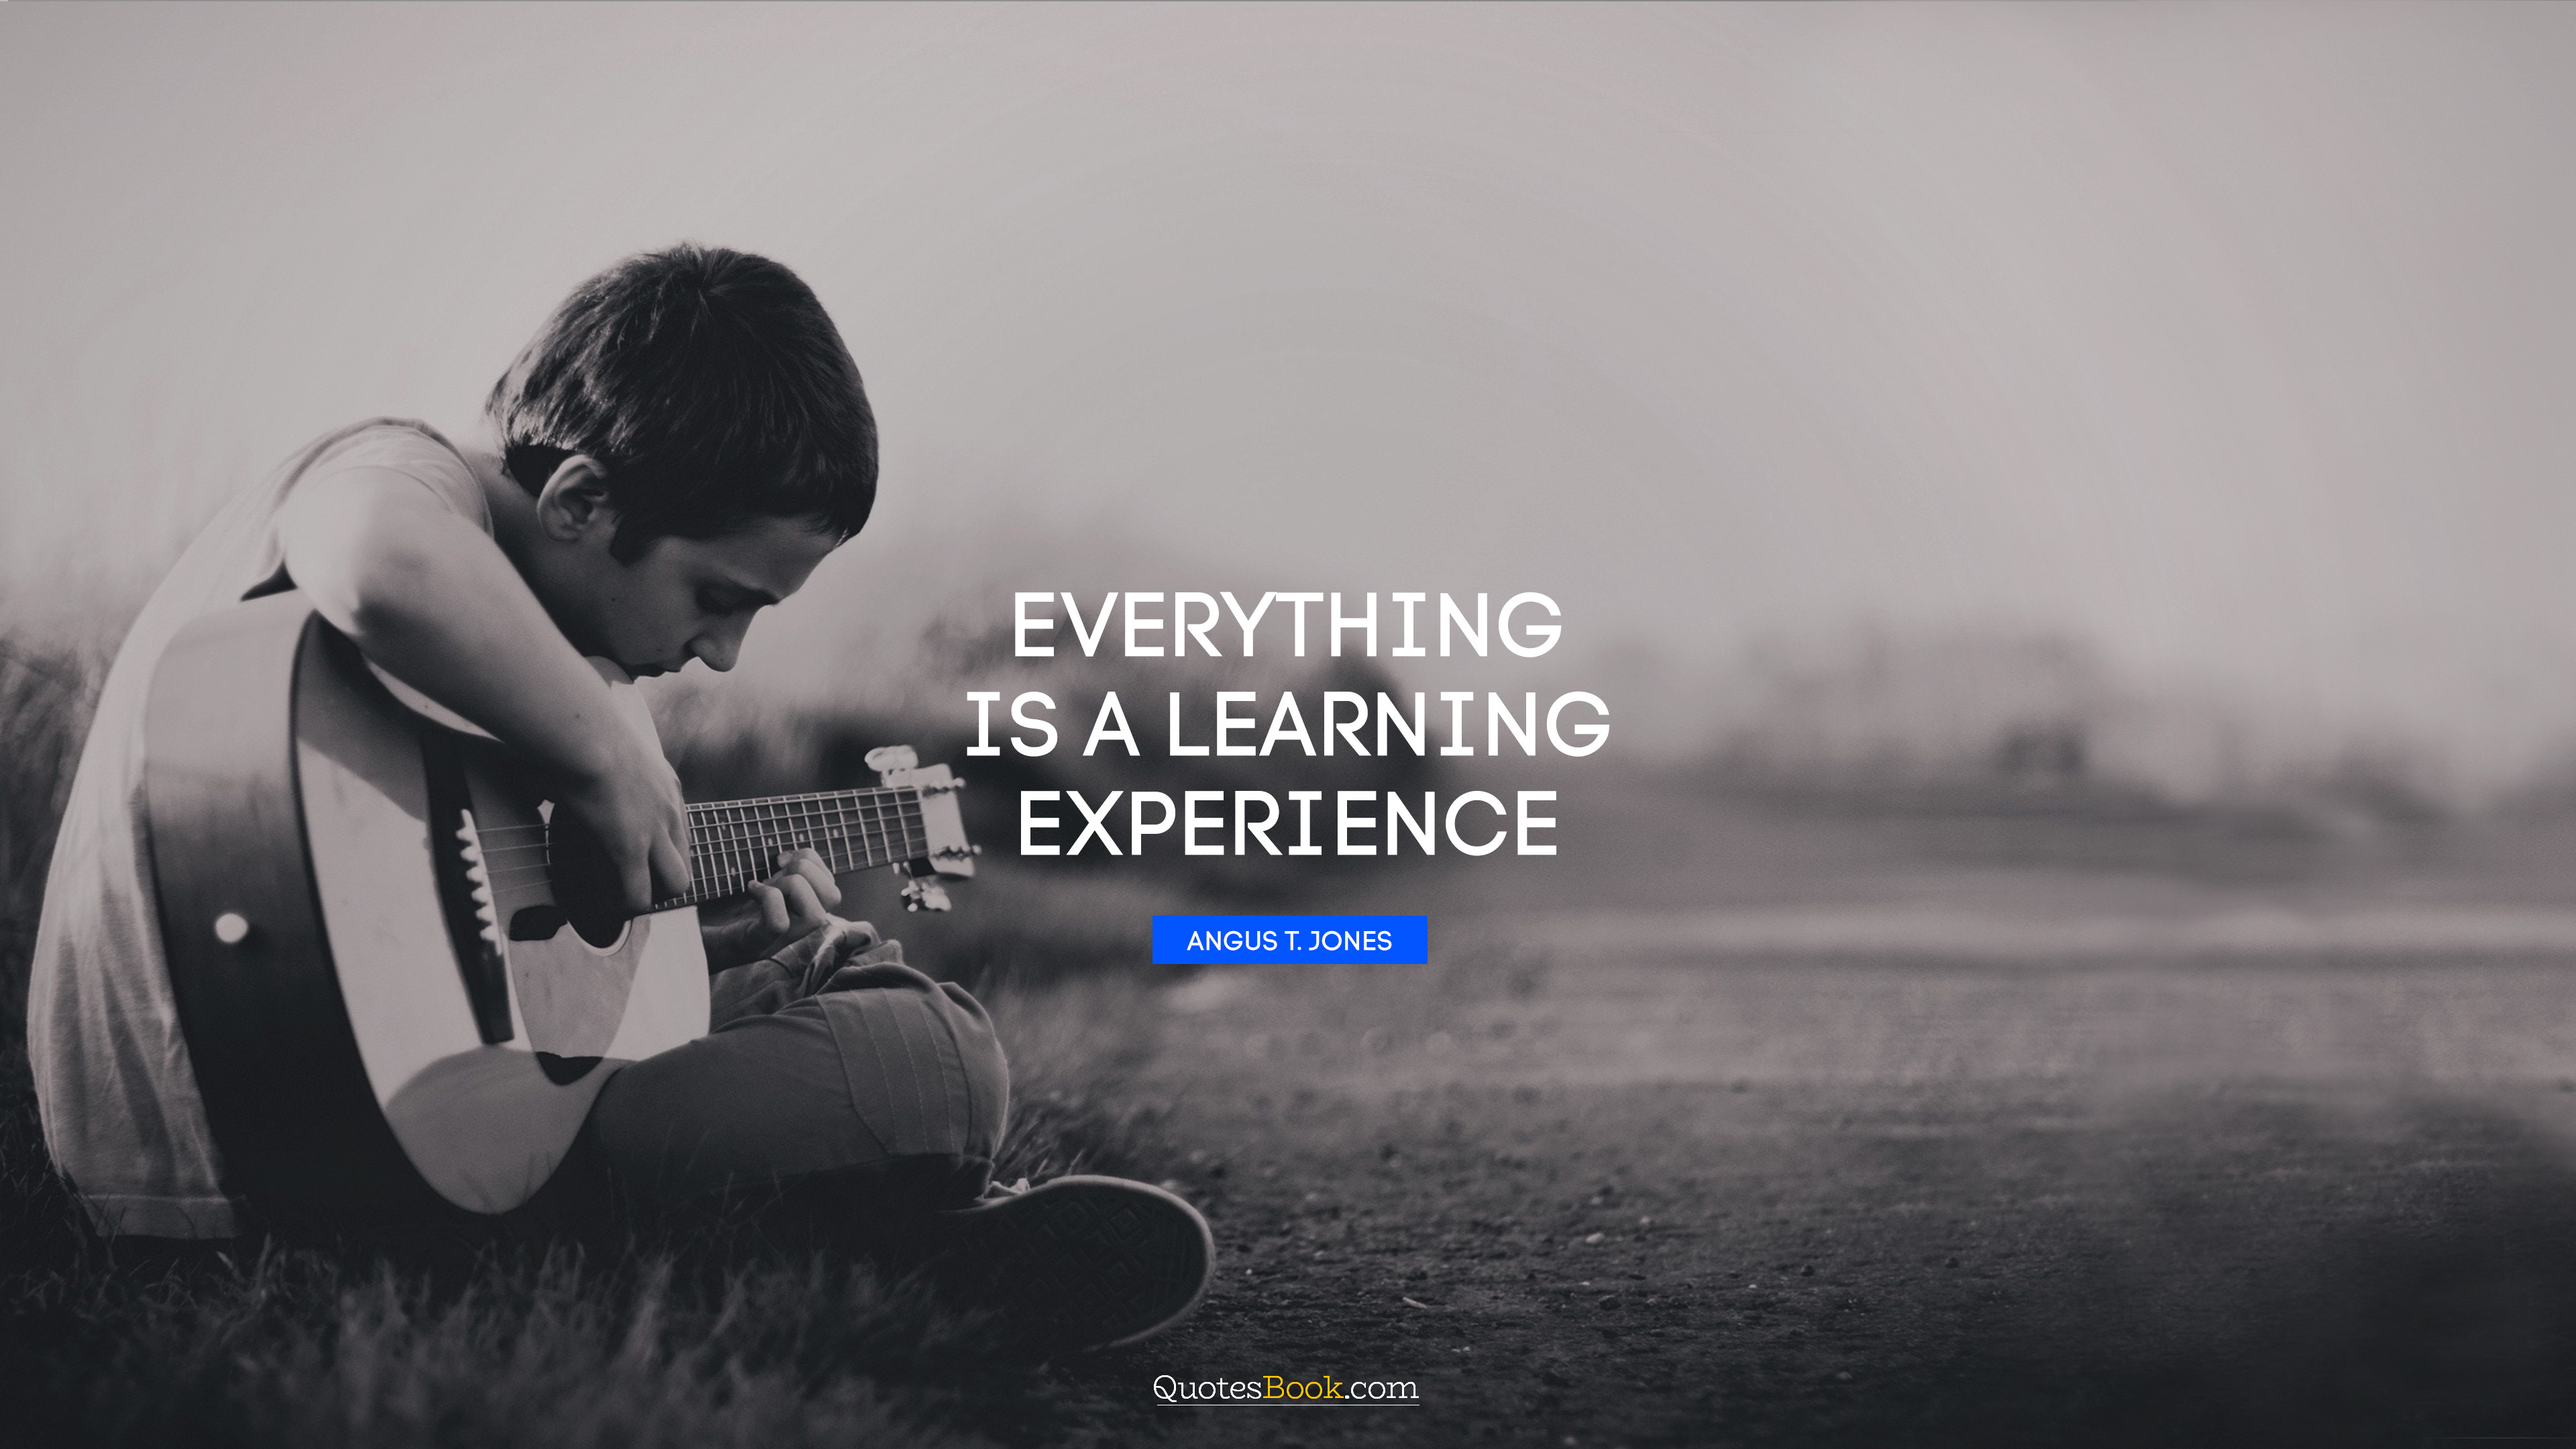 Everything is a learning experience. - Quote by Angus T. Jones - QuotesBook